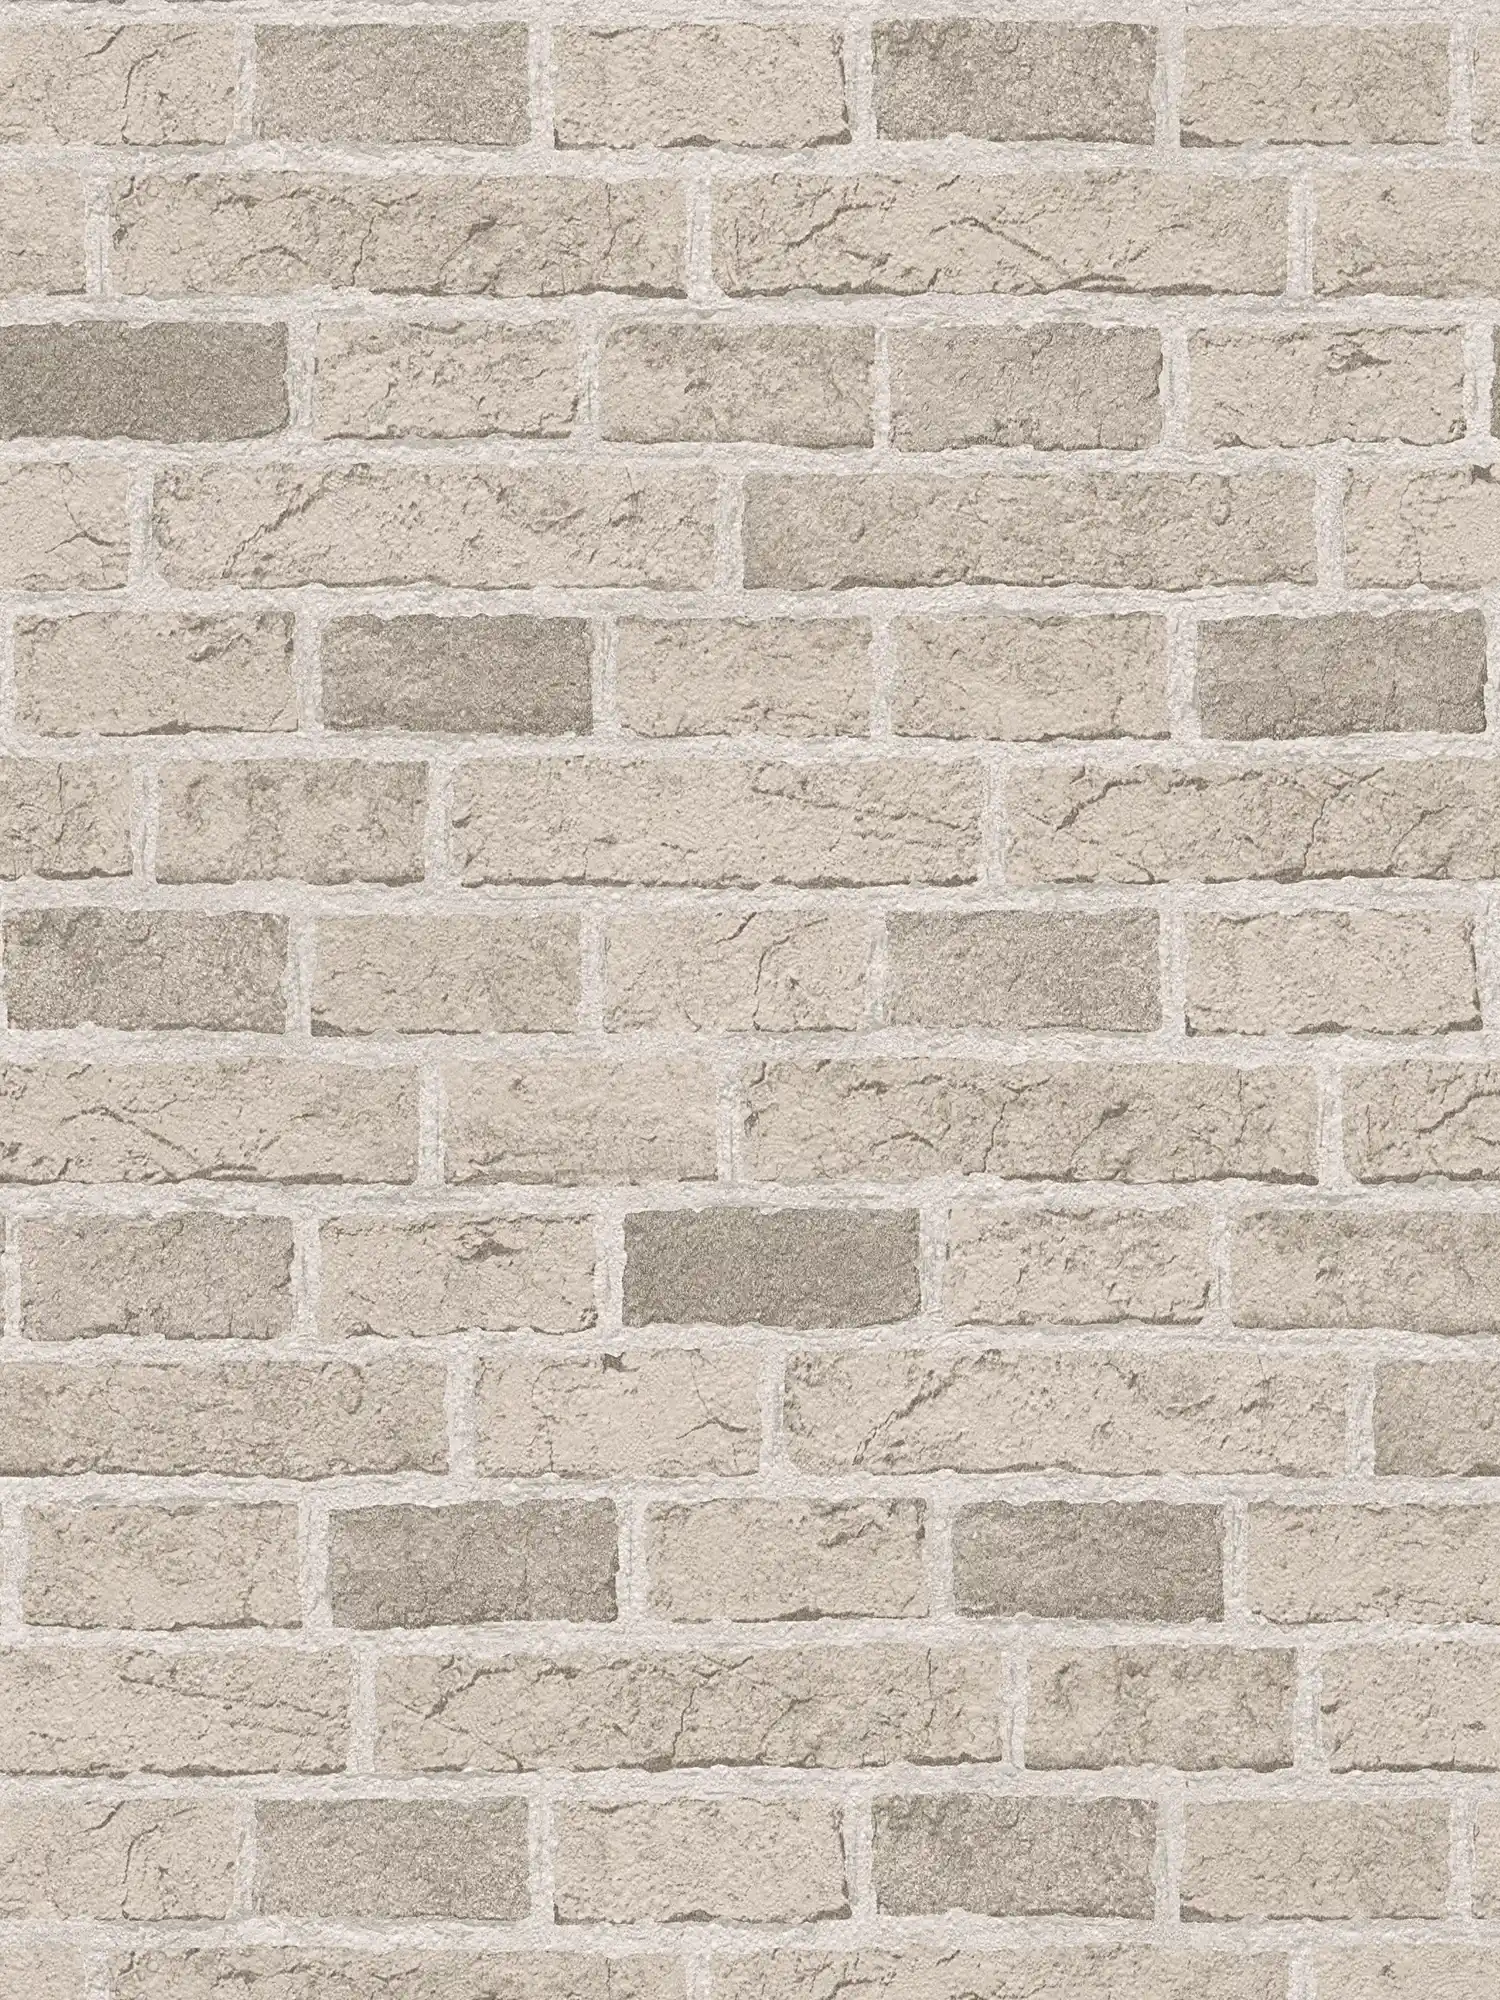 Stone wallpaper with brick wall rustic & detailed - cream, beige
